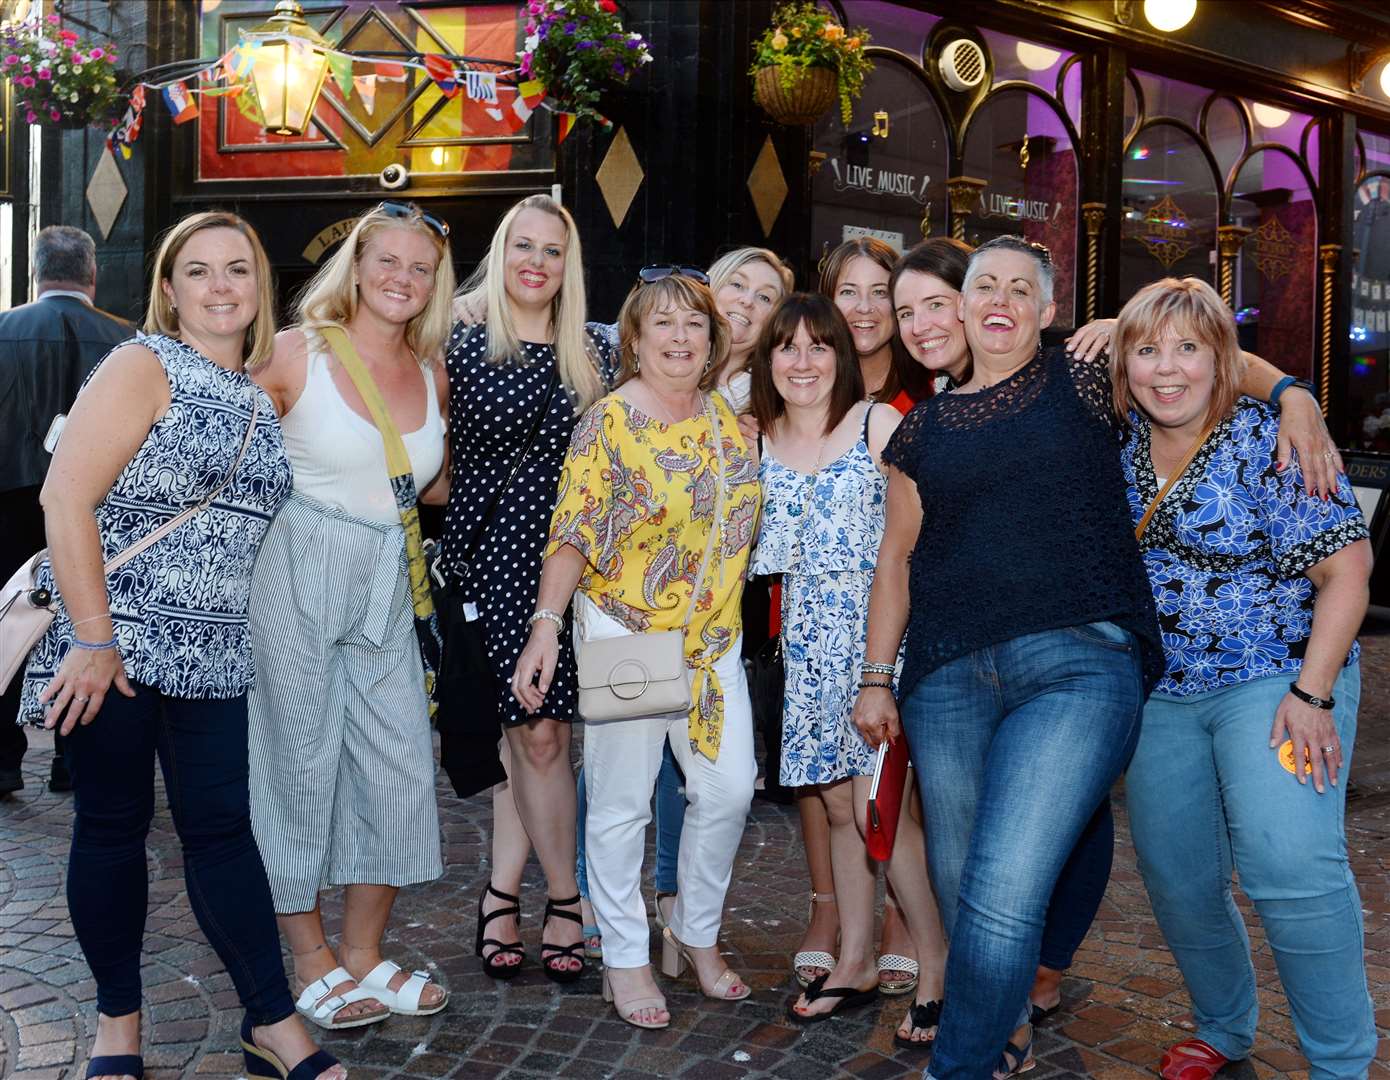 The staff of Ward 5C at Raigmore enjoy a night out. Picture: Gary Anthony.